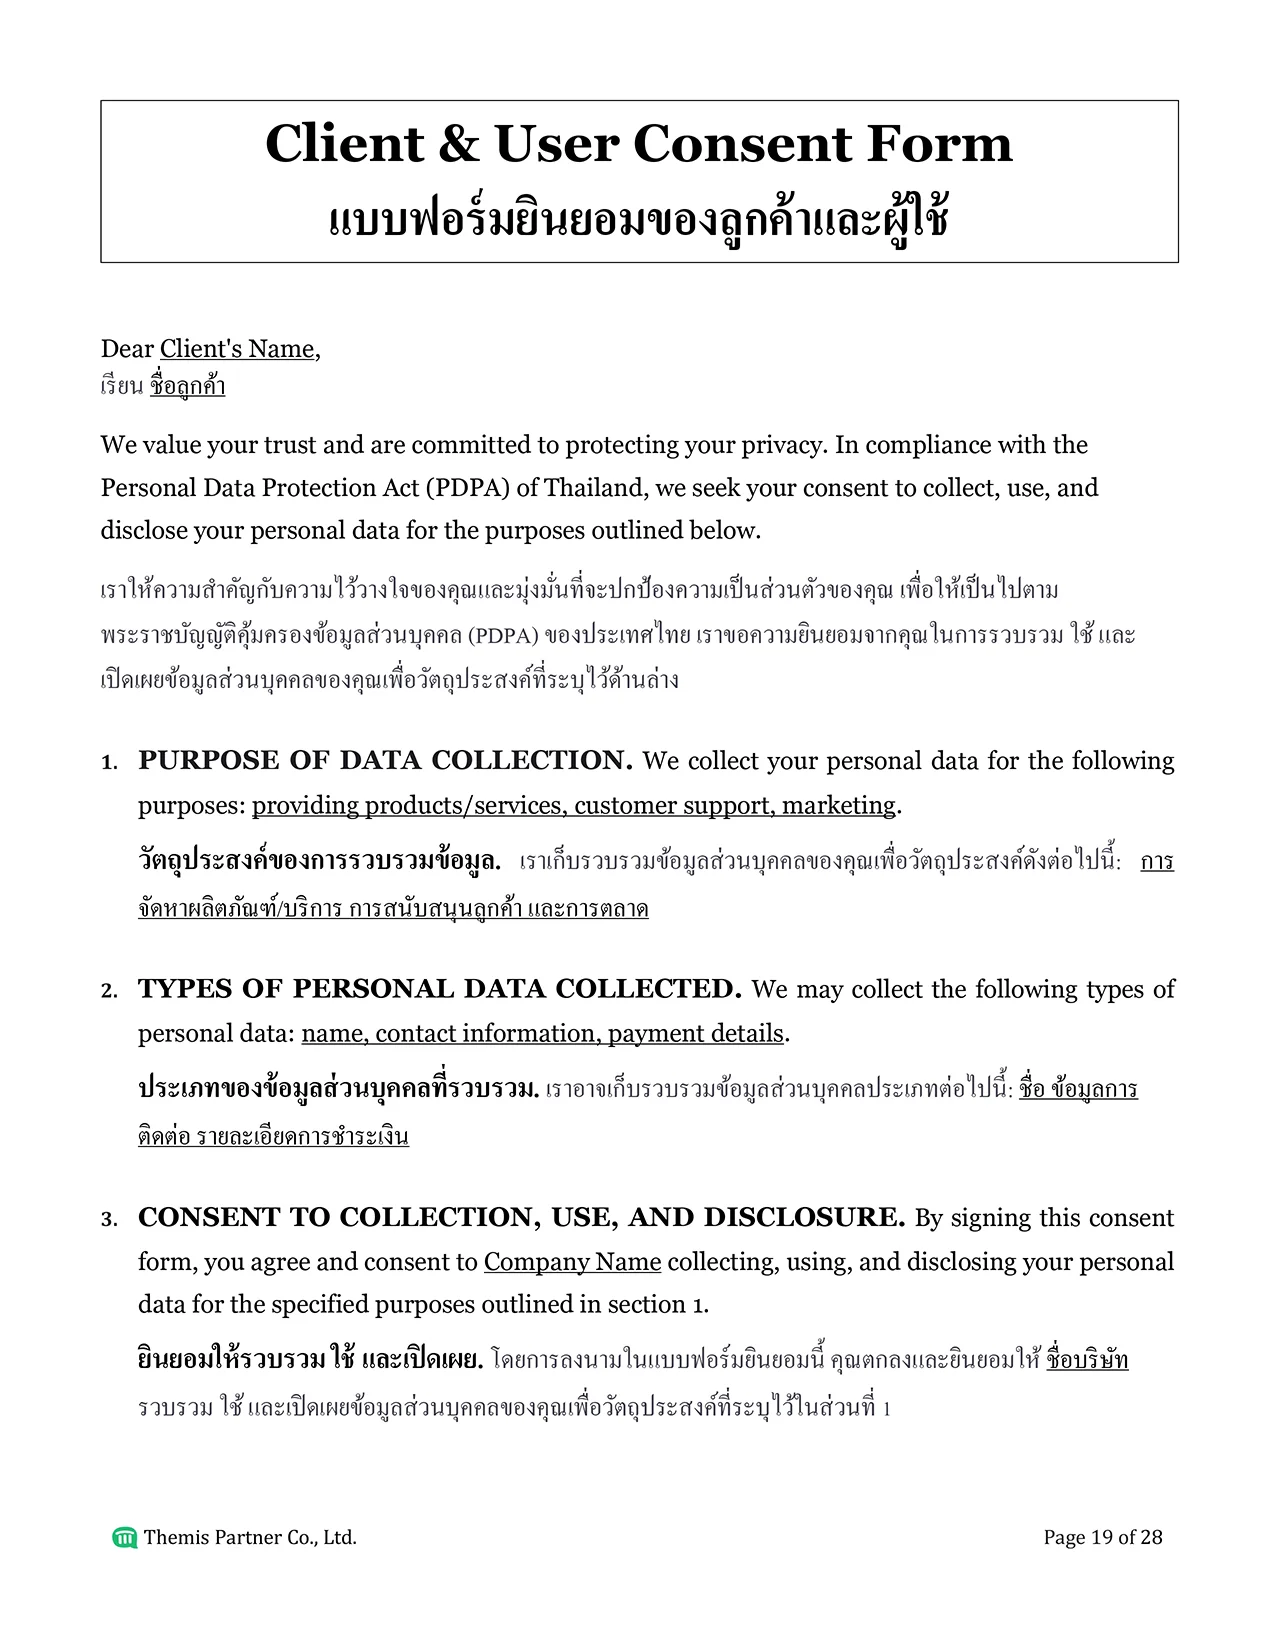 PDPA consent form and company policy Thailand 19